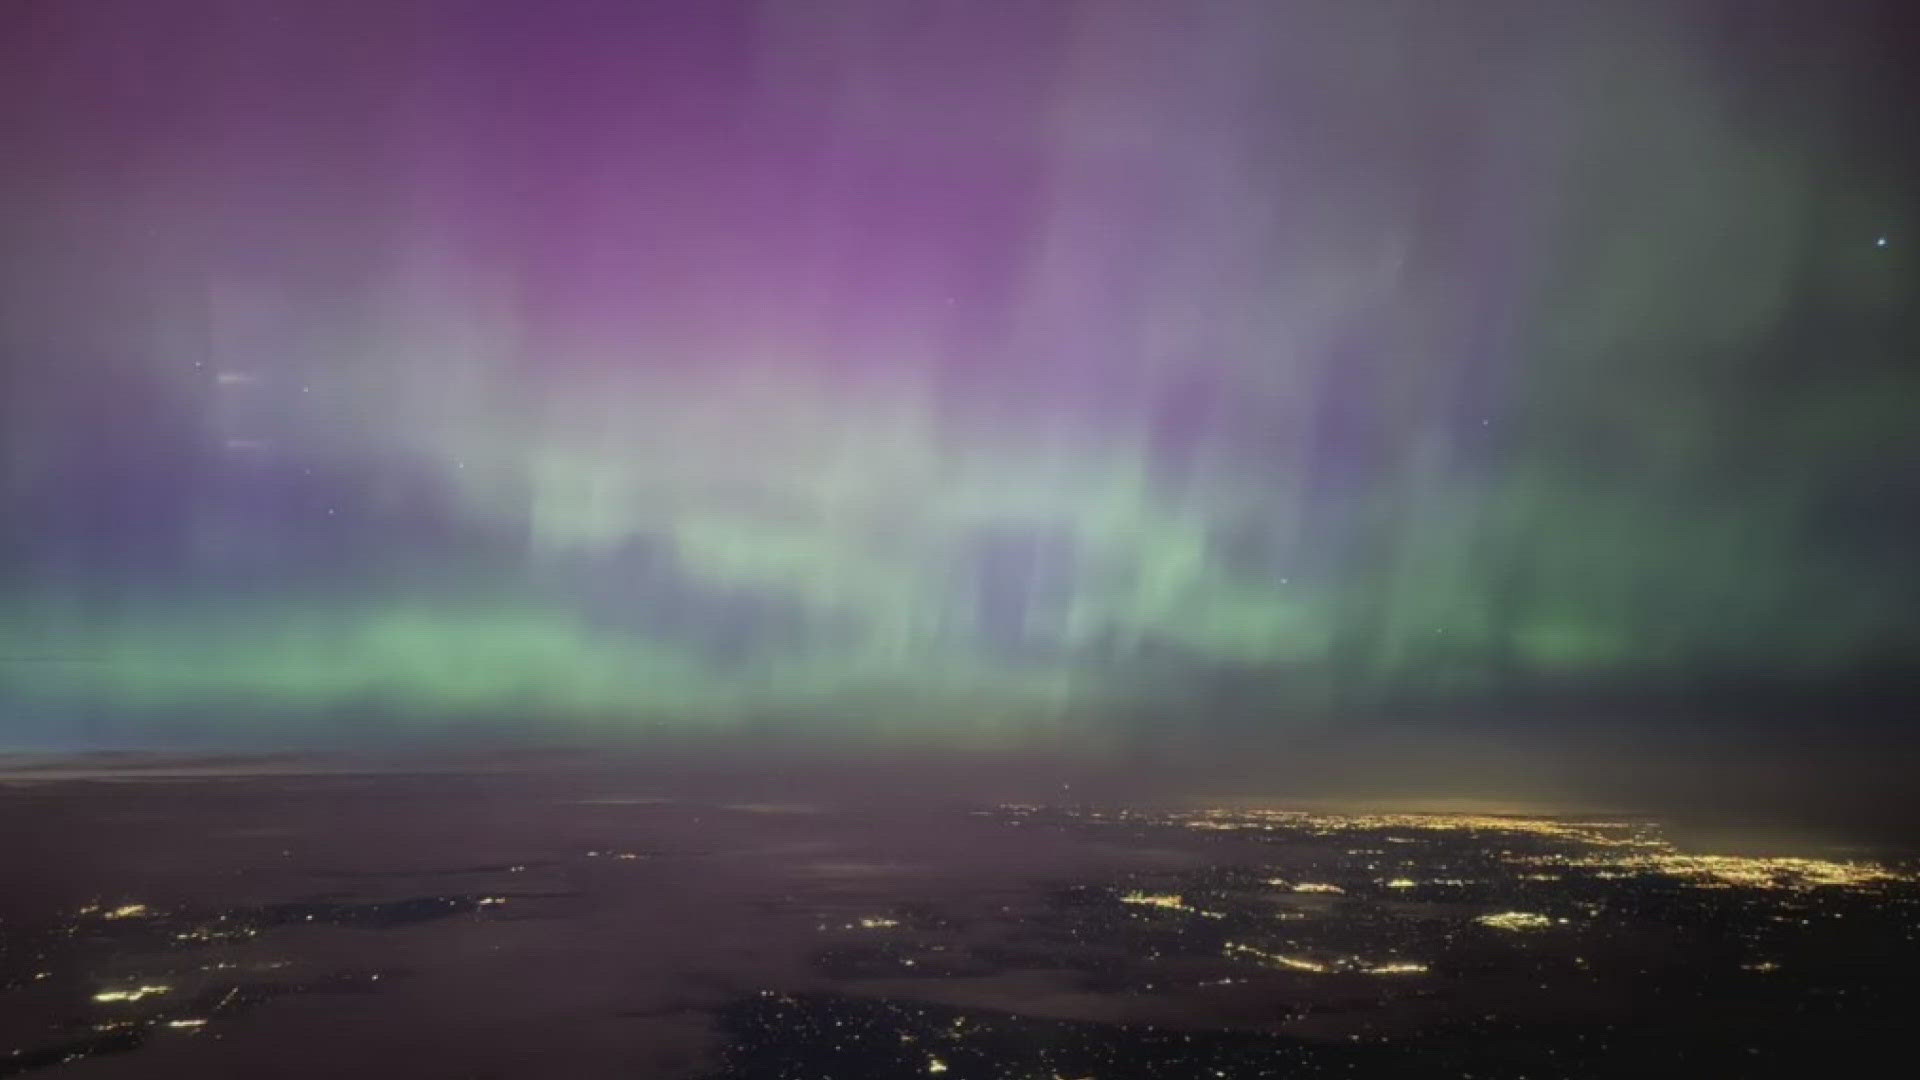 Solar flares bring the Aurora Lights to the U.S.